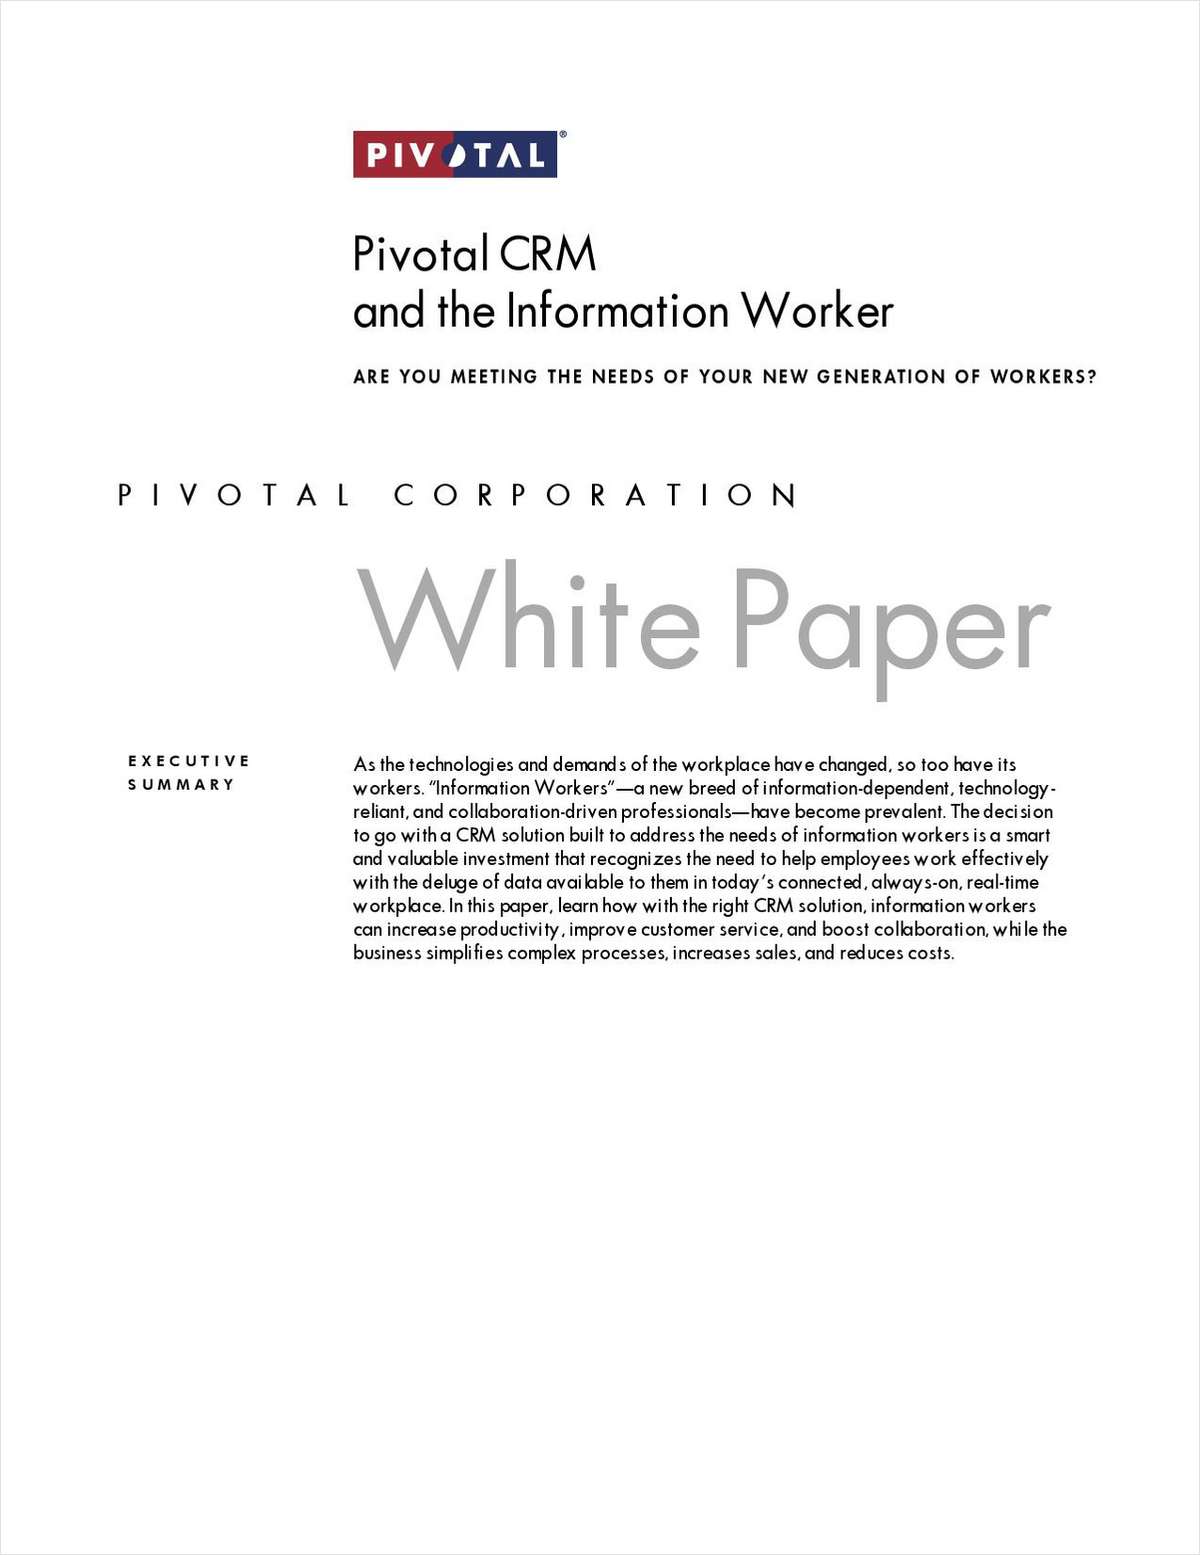 Pivotal CRM and the Information Worker: Are You Meeting the Needs of Your New Generation of Workers?